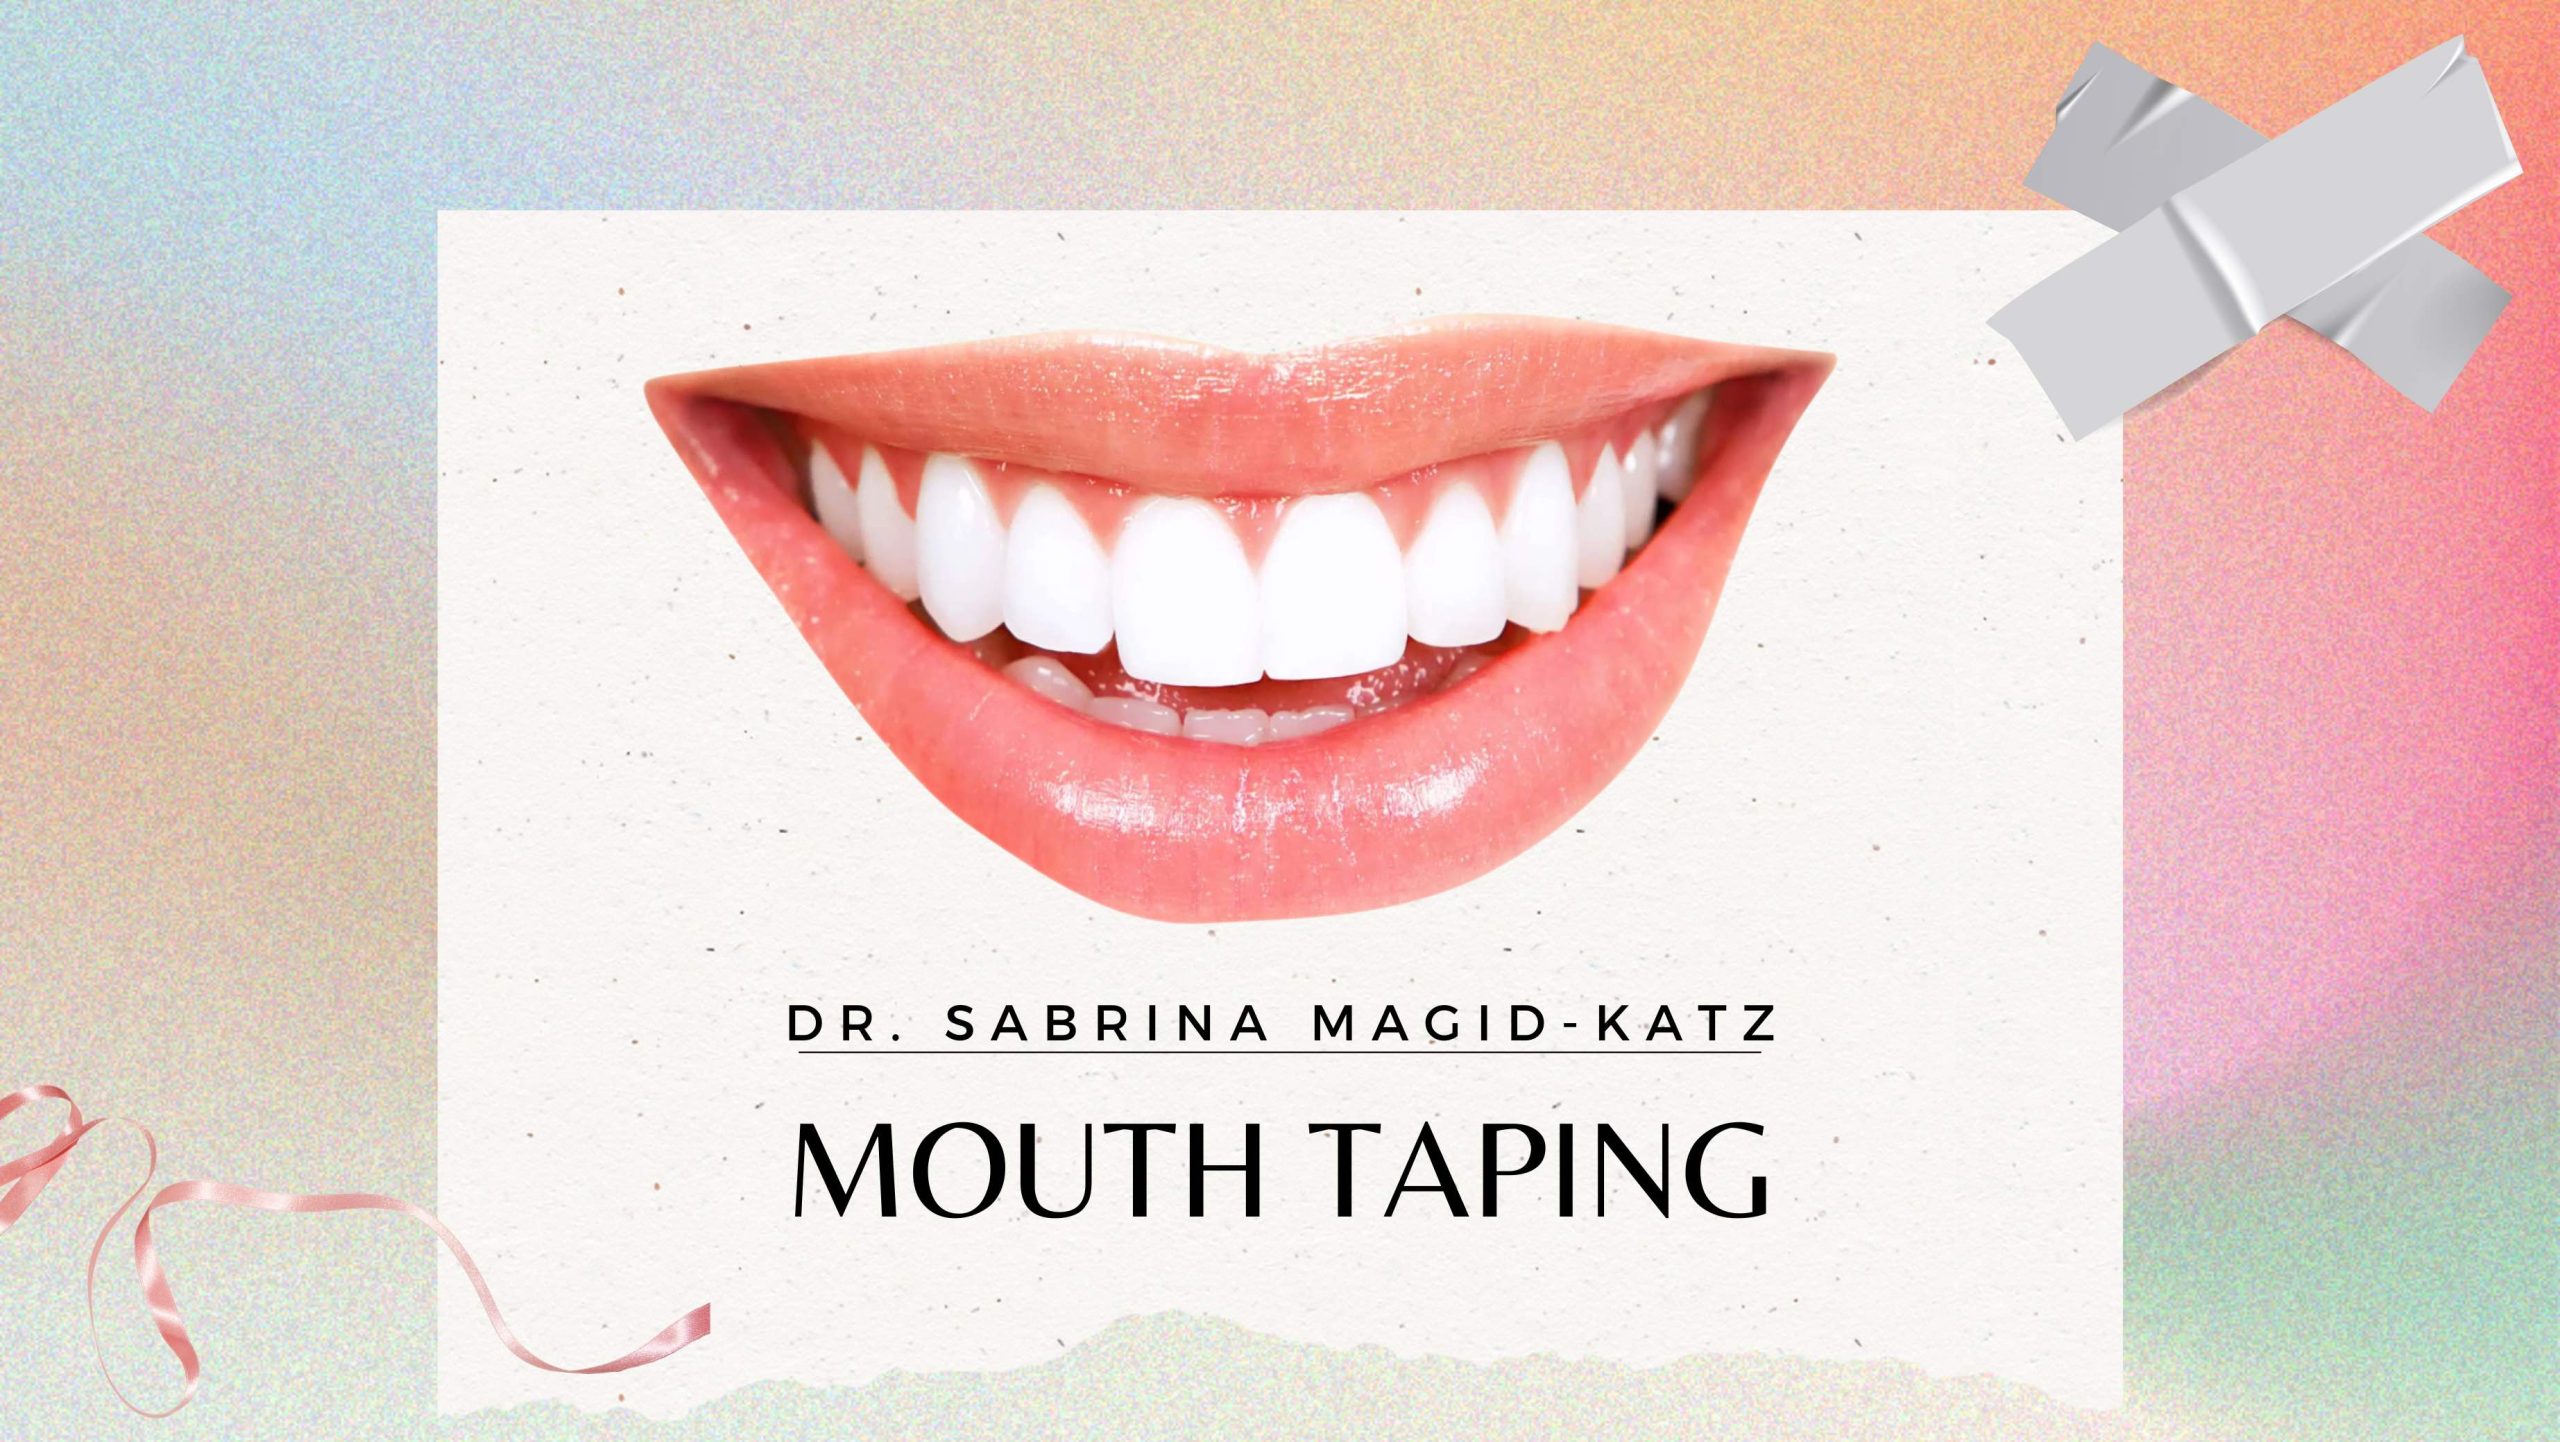 Mouth taping for sleep